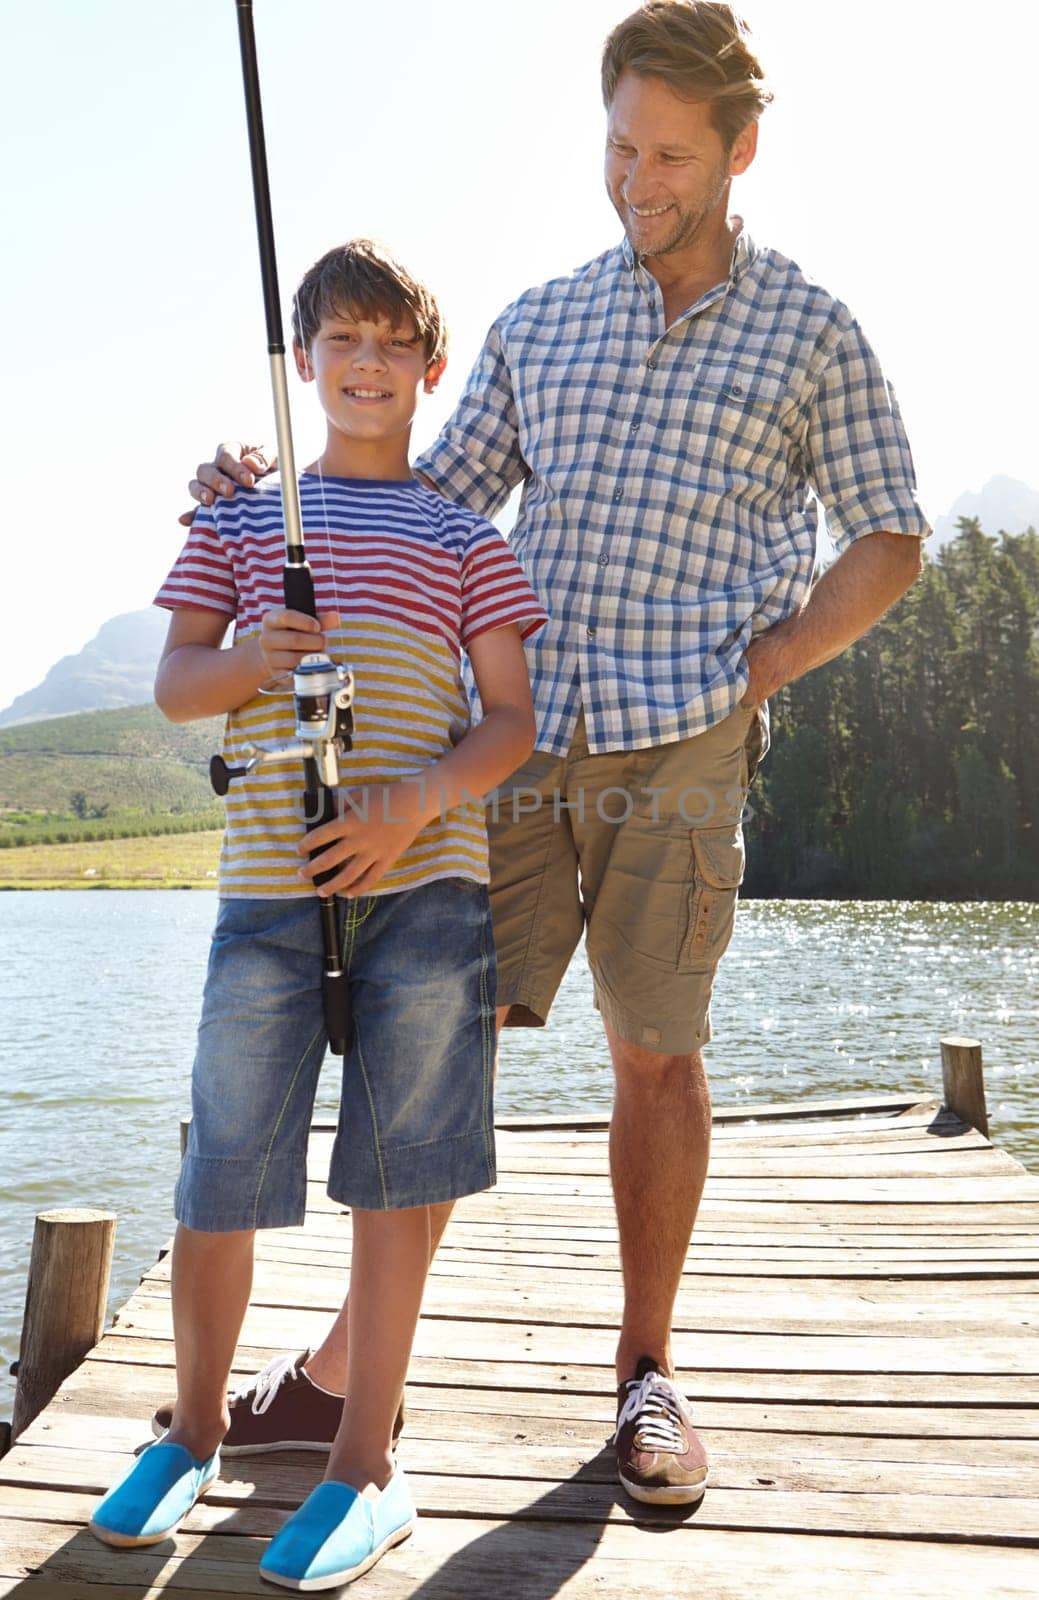 Fishing, lake or pole by father and son in nature bonding, vacation or travel adventure outdoor. Family, love and kid with dad at a river for learning, teaching or sustainable living while camping by YuriArcurs